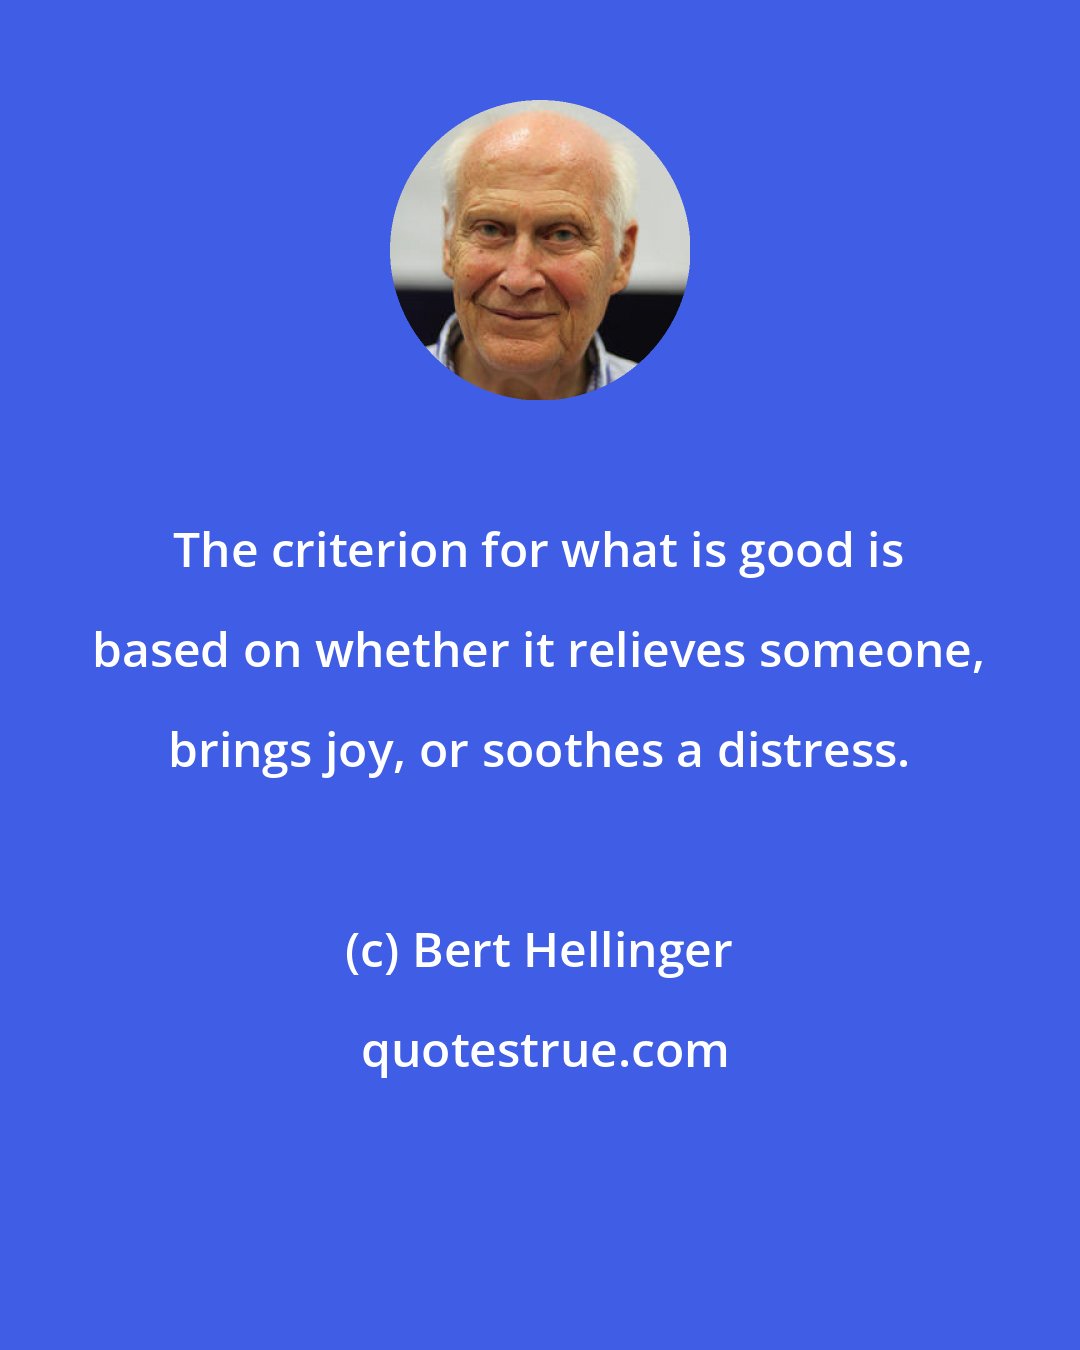 Bert Hellinger: The criterion for what is good is based on whether it relieves someone, brings joy, or soothes a distress.